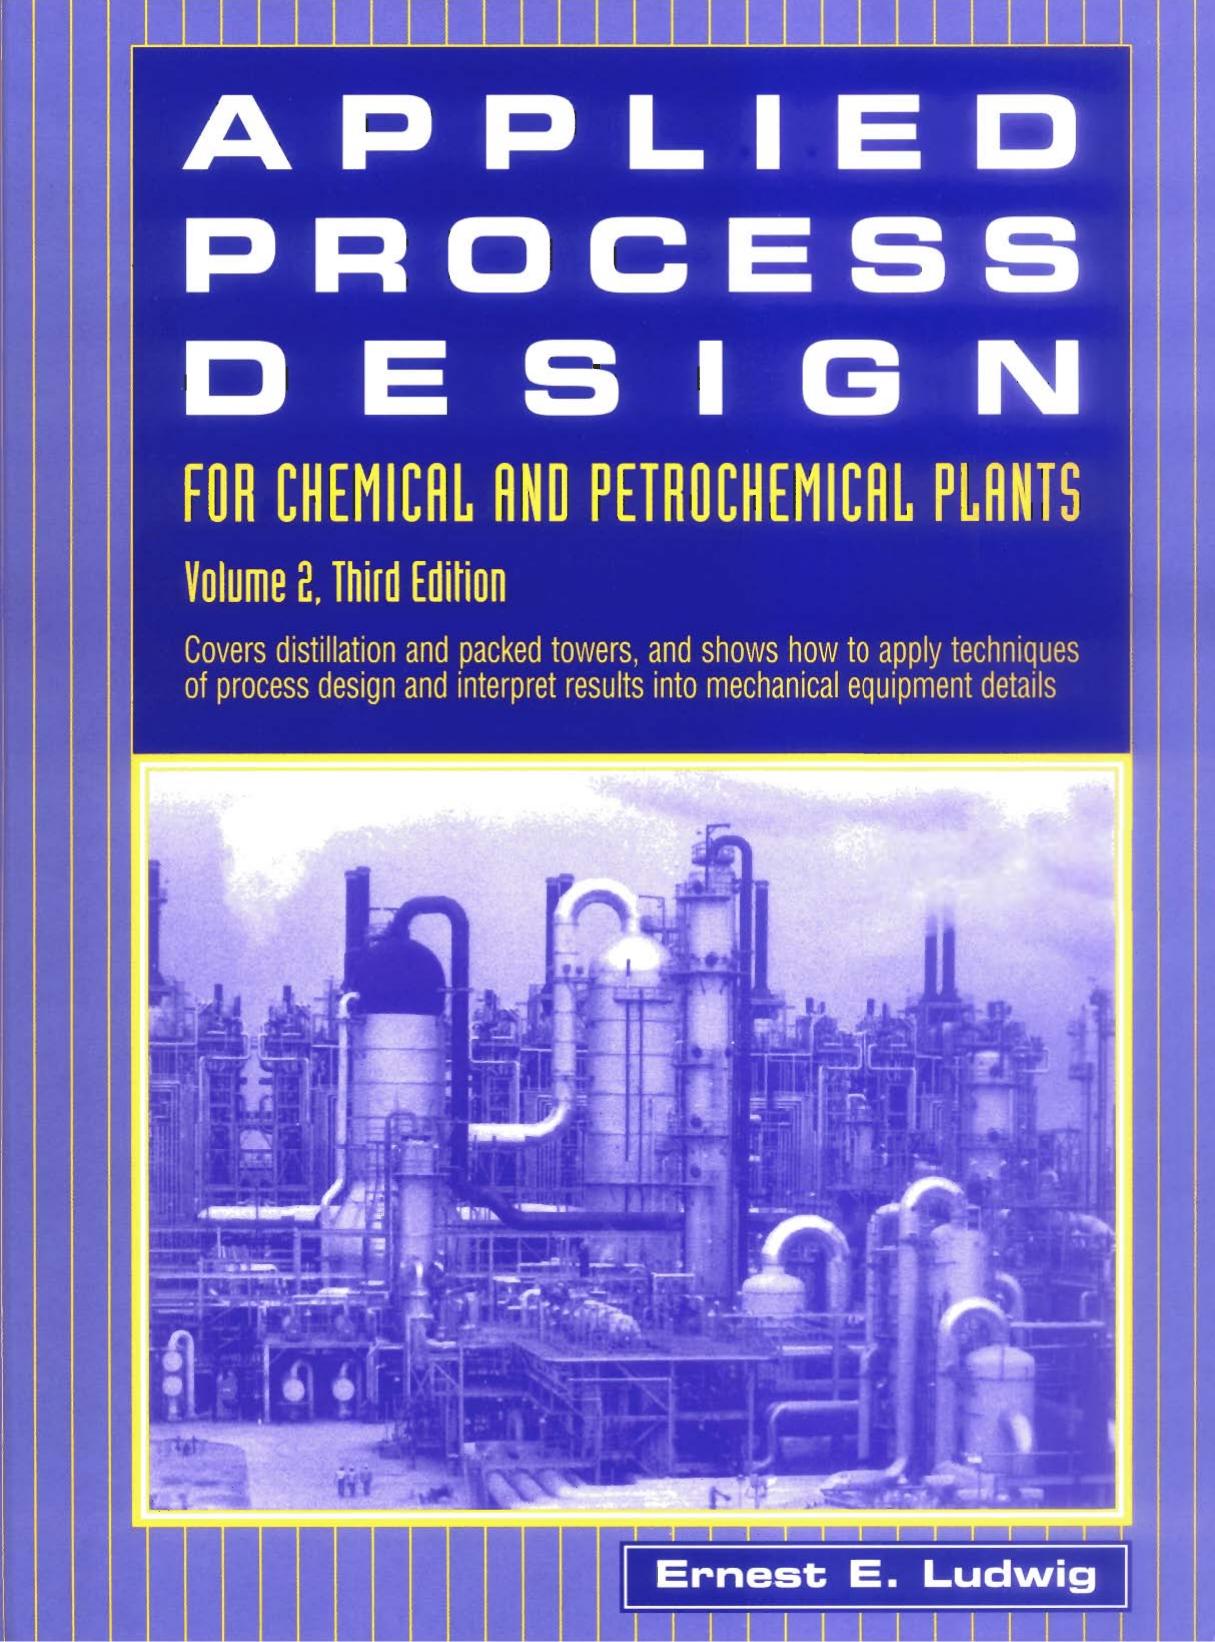 Applied Process Design for Chemical and Petrochemical Plants